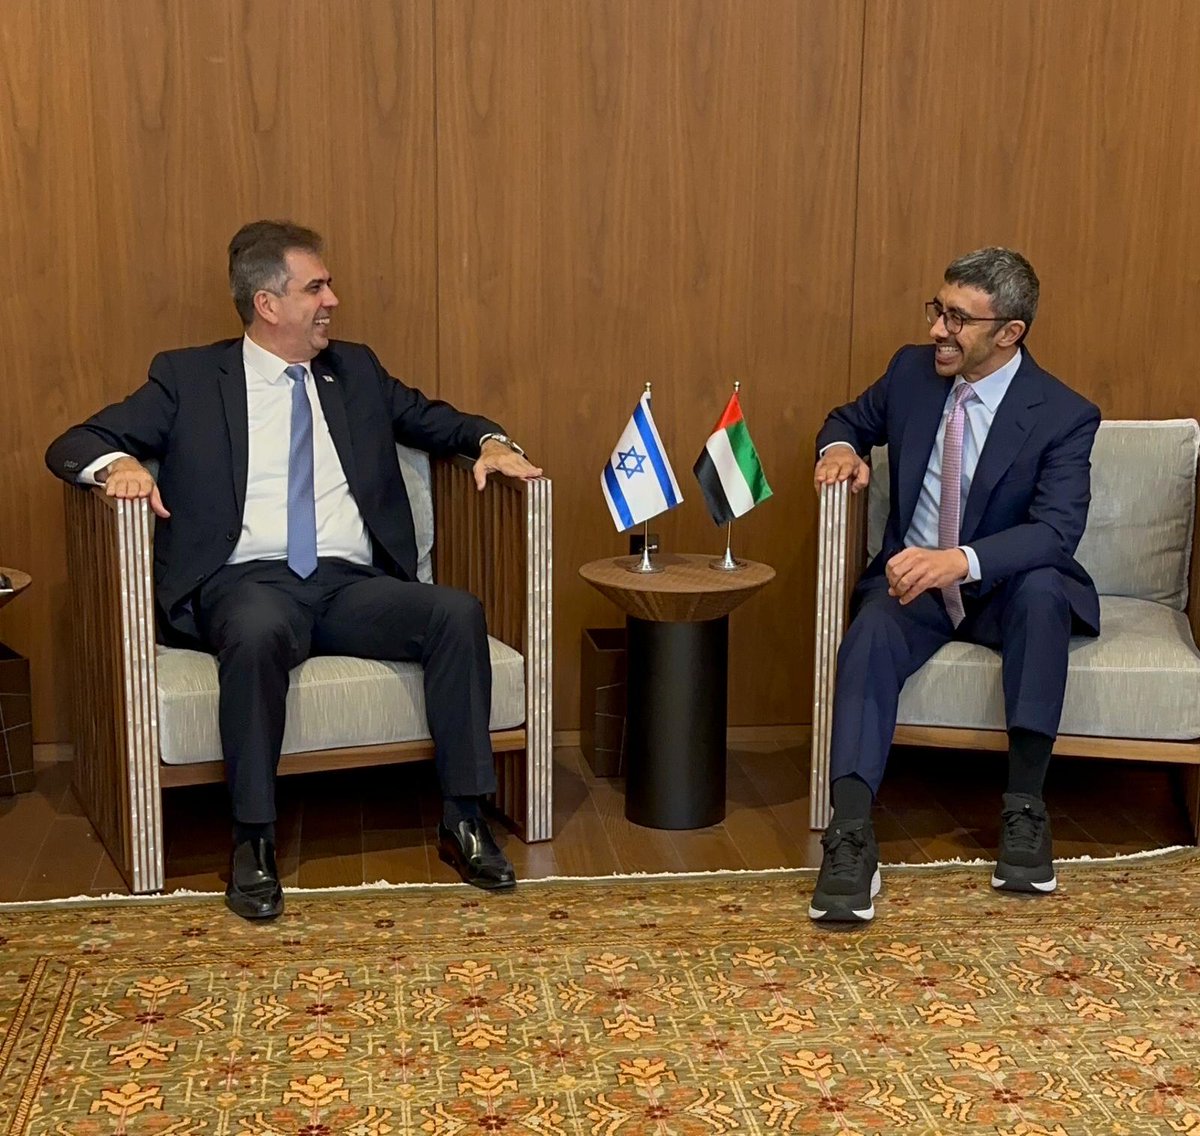 Israel Minister of Foreign Affairs @elicoh1 met UAE Minister of Foreign Affairs @ABZayed: The ministers discussed continental connectivity, regional security and economic projects